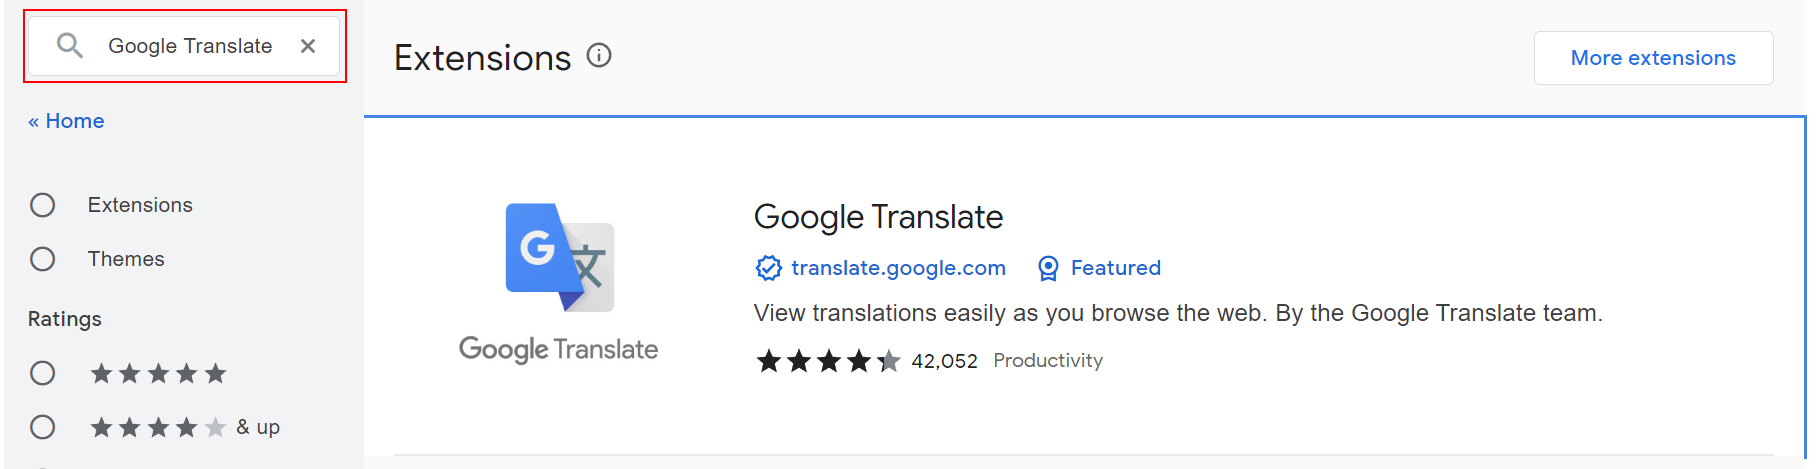 Search for Google Translate